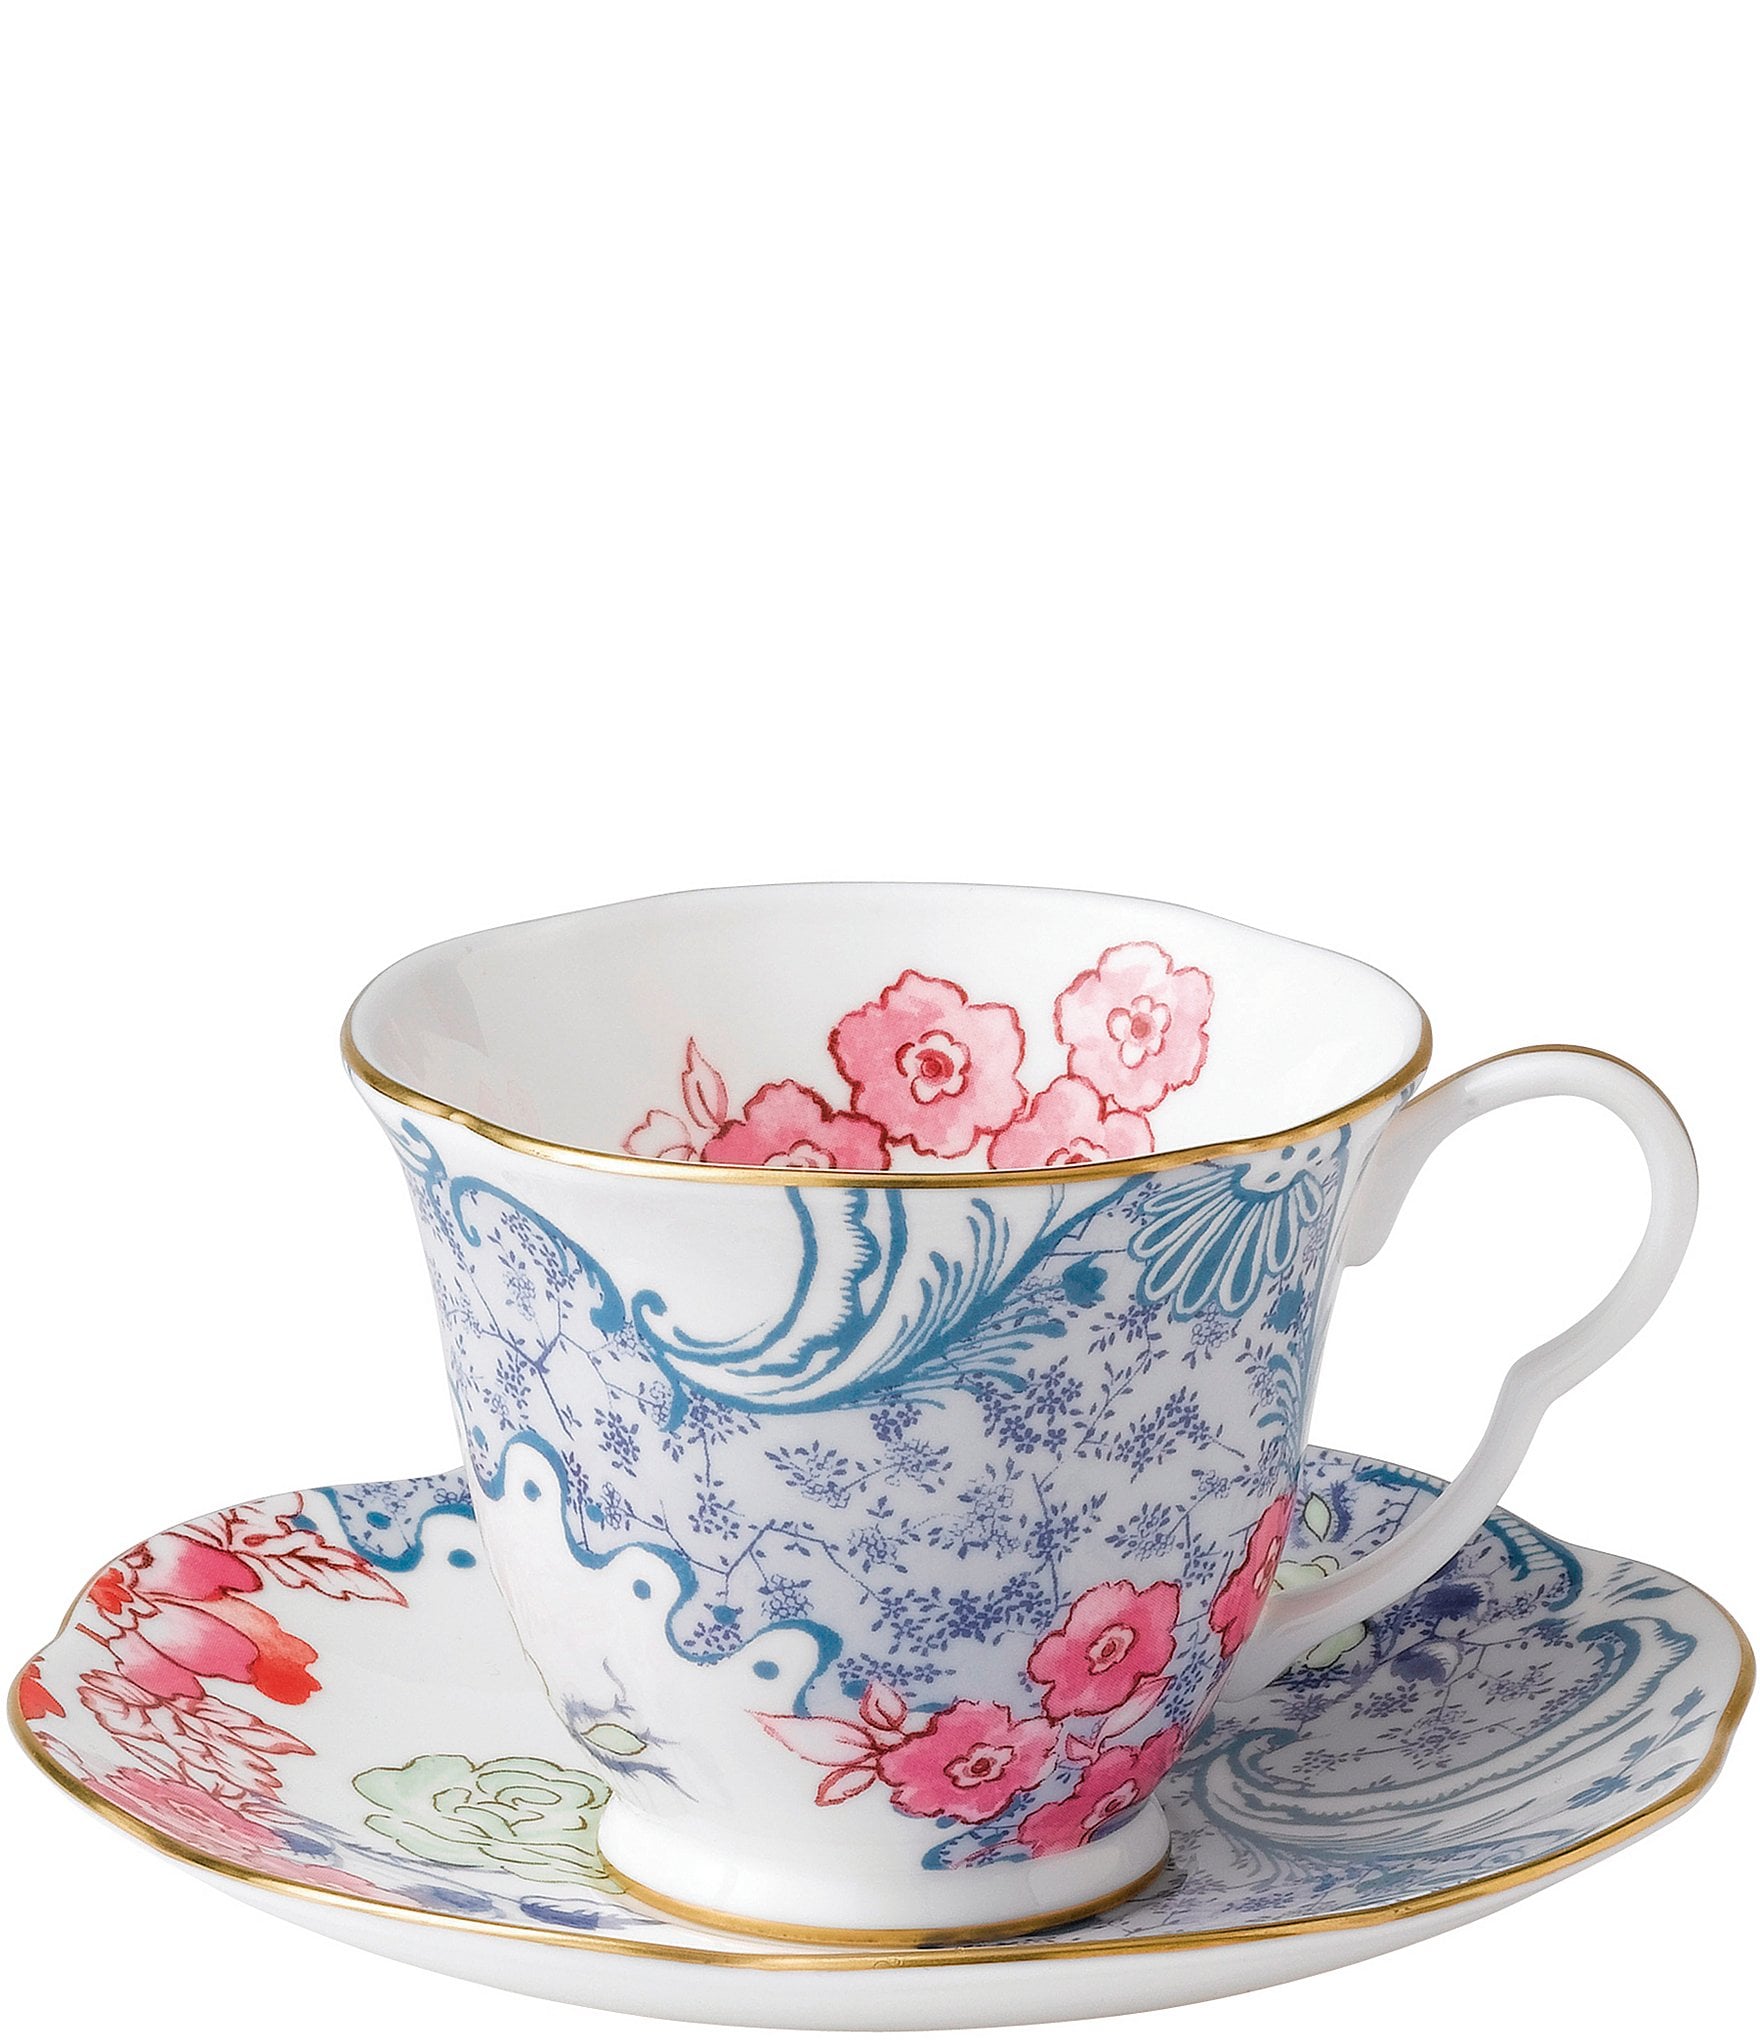 Pretty Little Teacups Cup and Saucer Set Pink Butterflies in Gift Box 